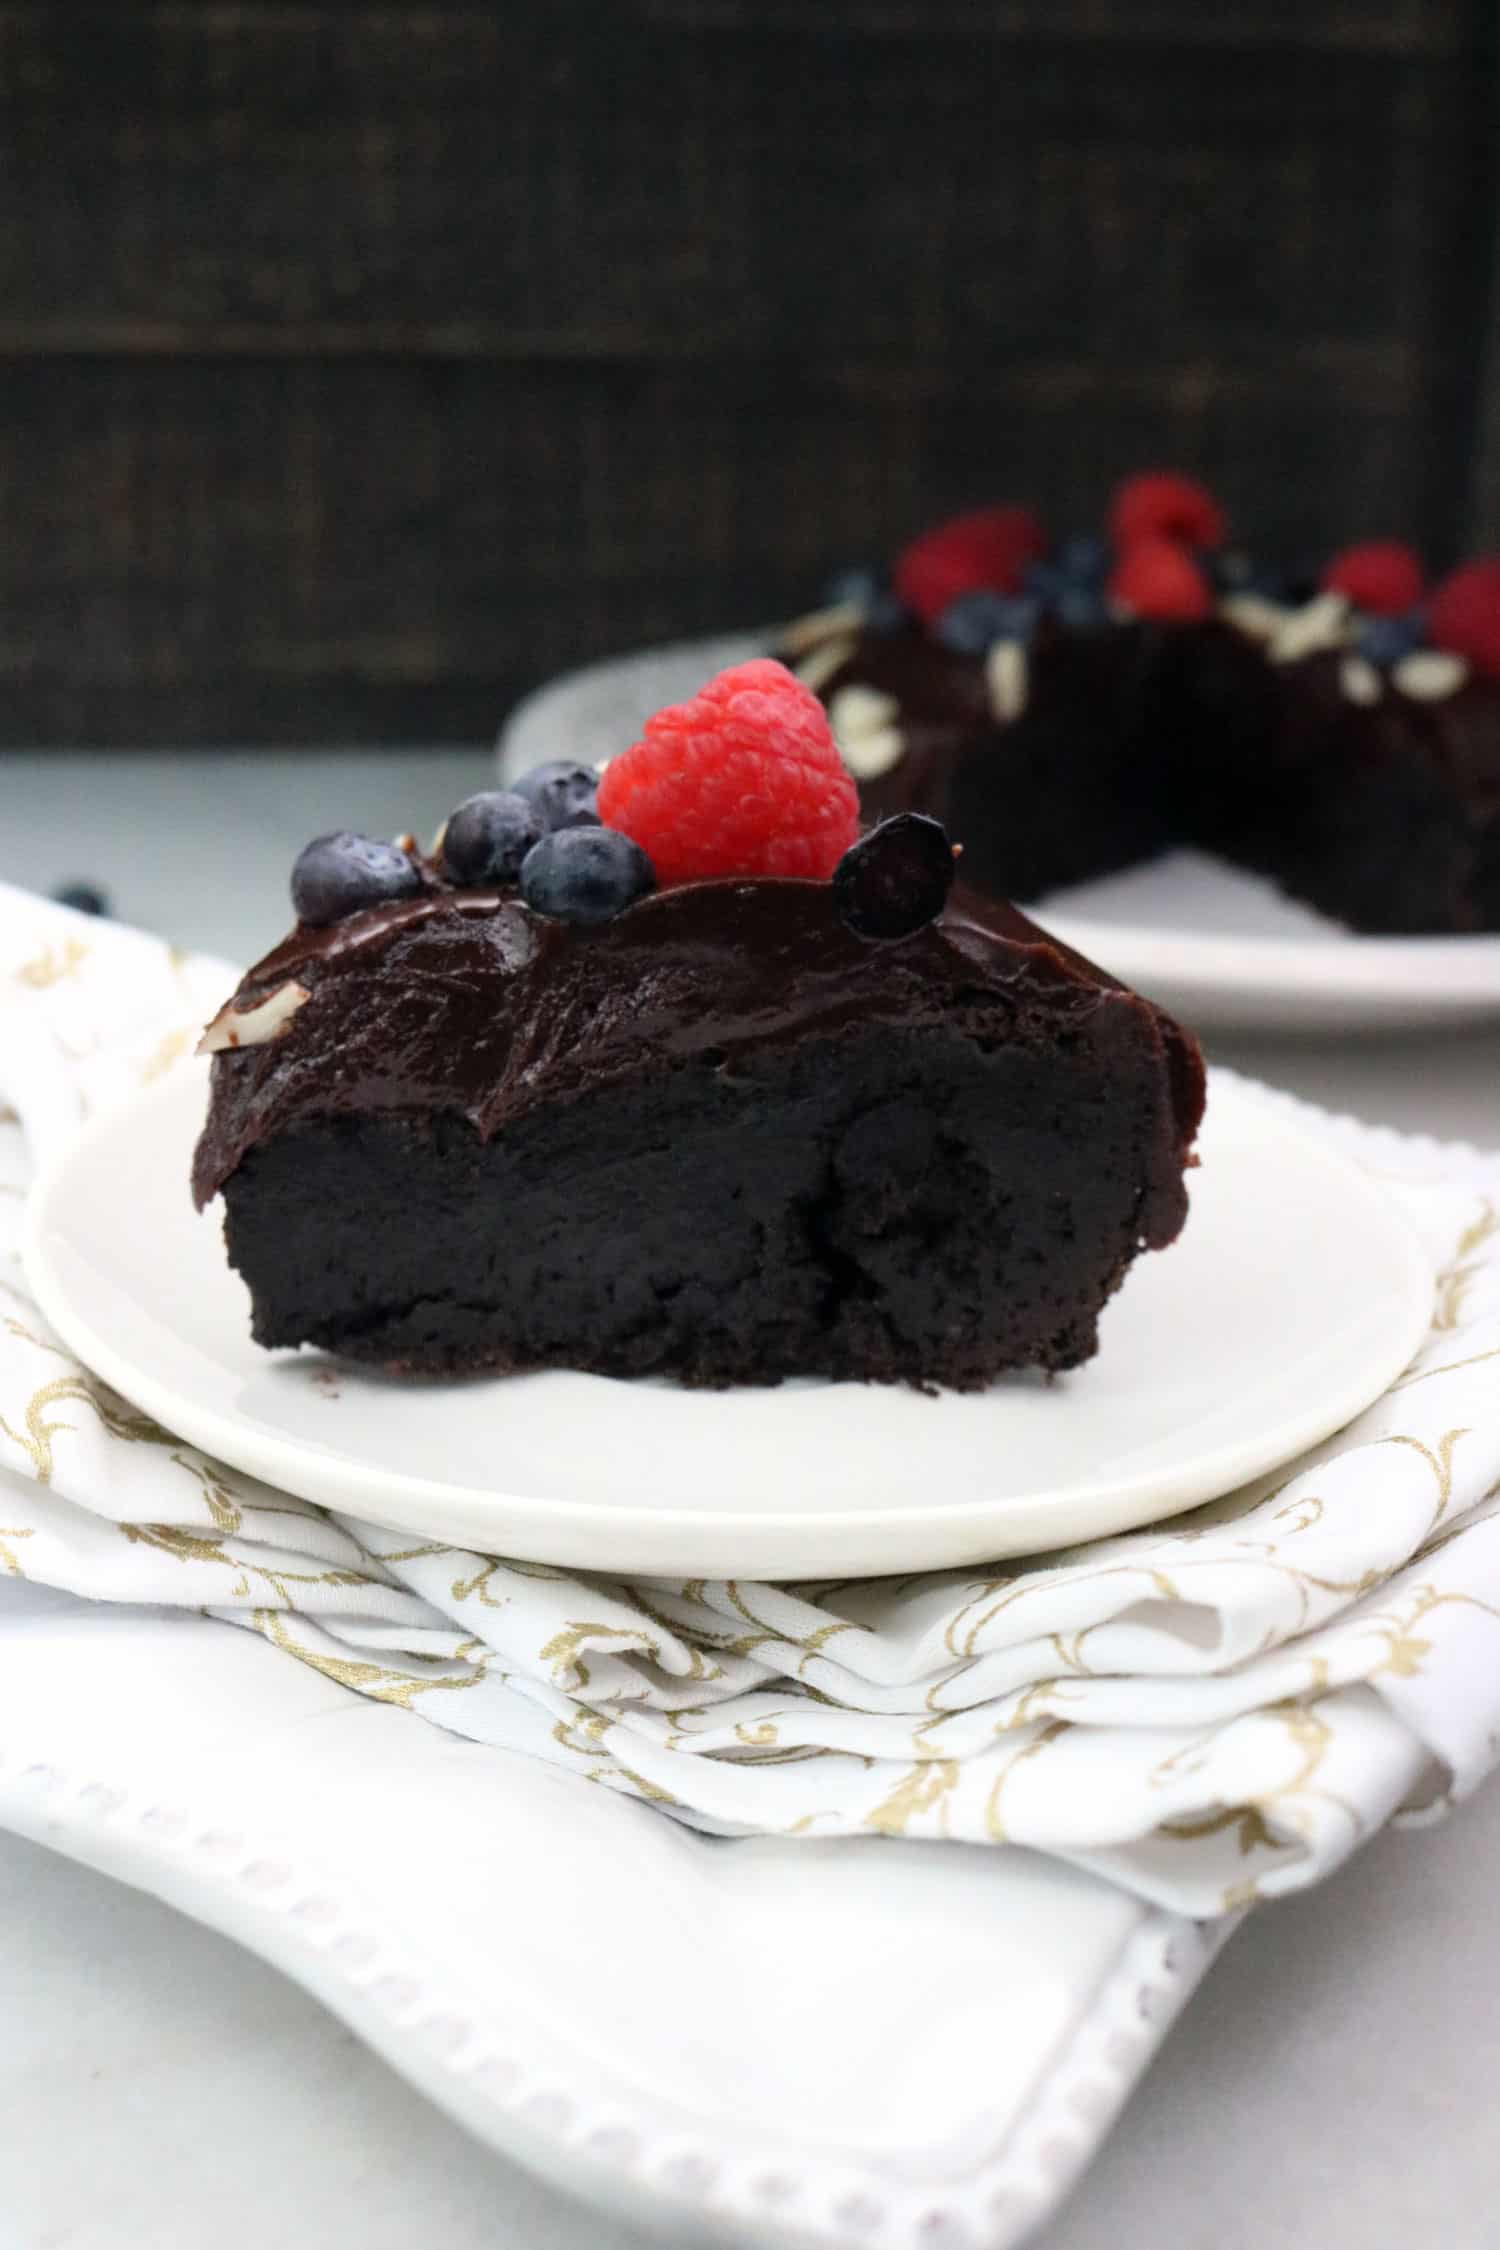 Slice of Gluten Free Cake - Flourless Chocolate Cake with Dark Chocolate Ganache topped with a raspberry and blueberries on a white plate